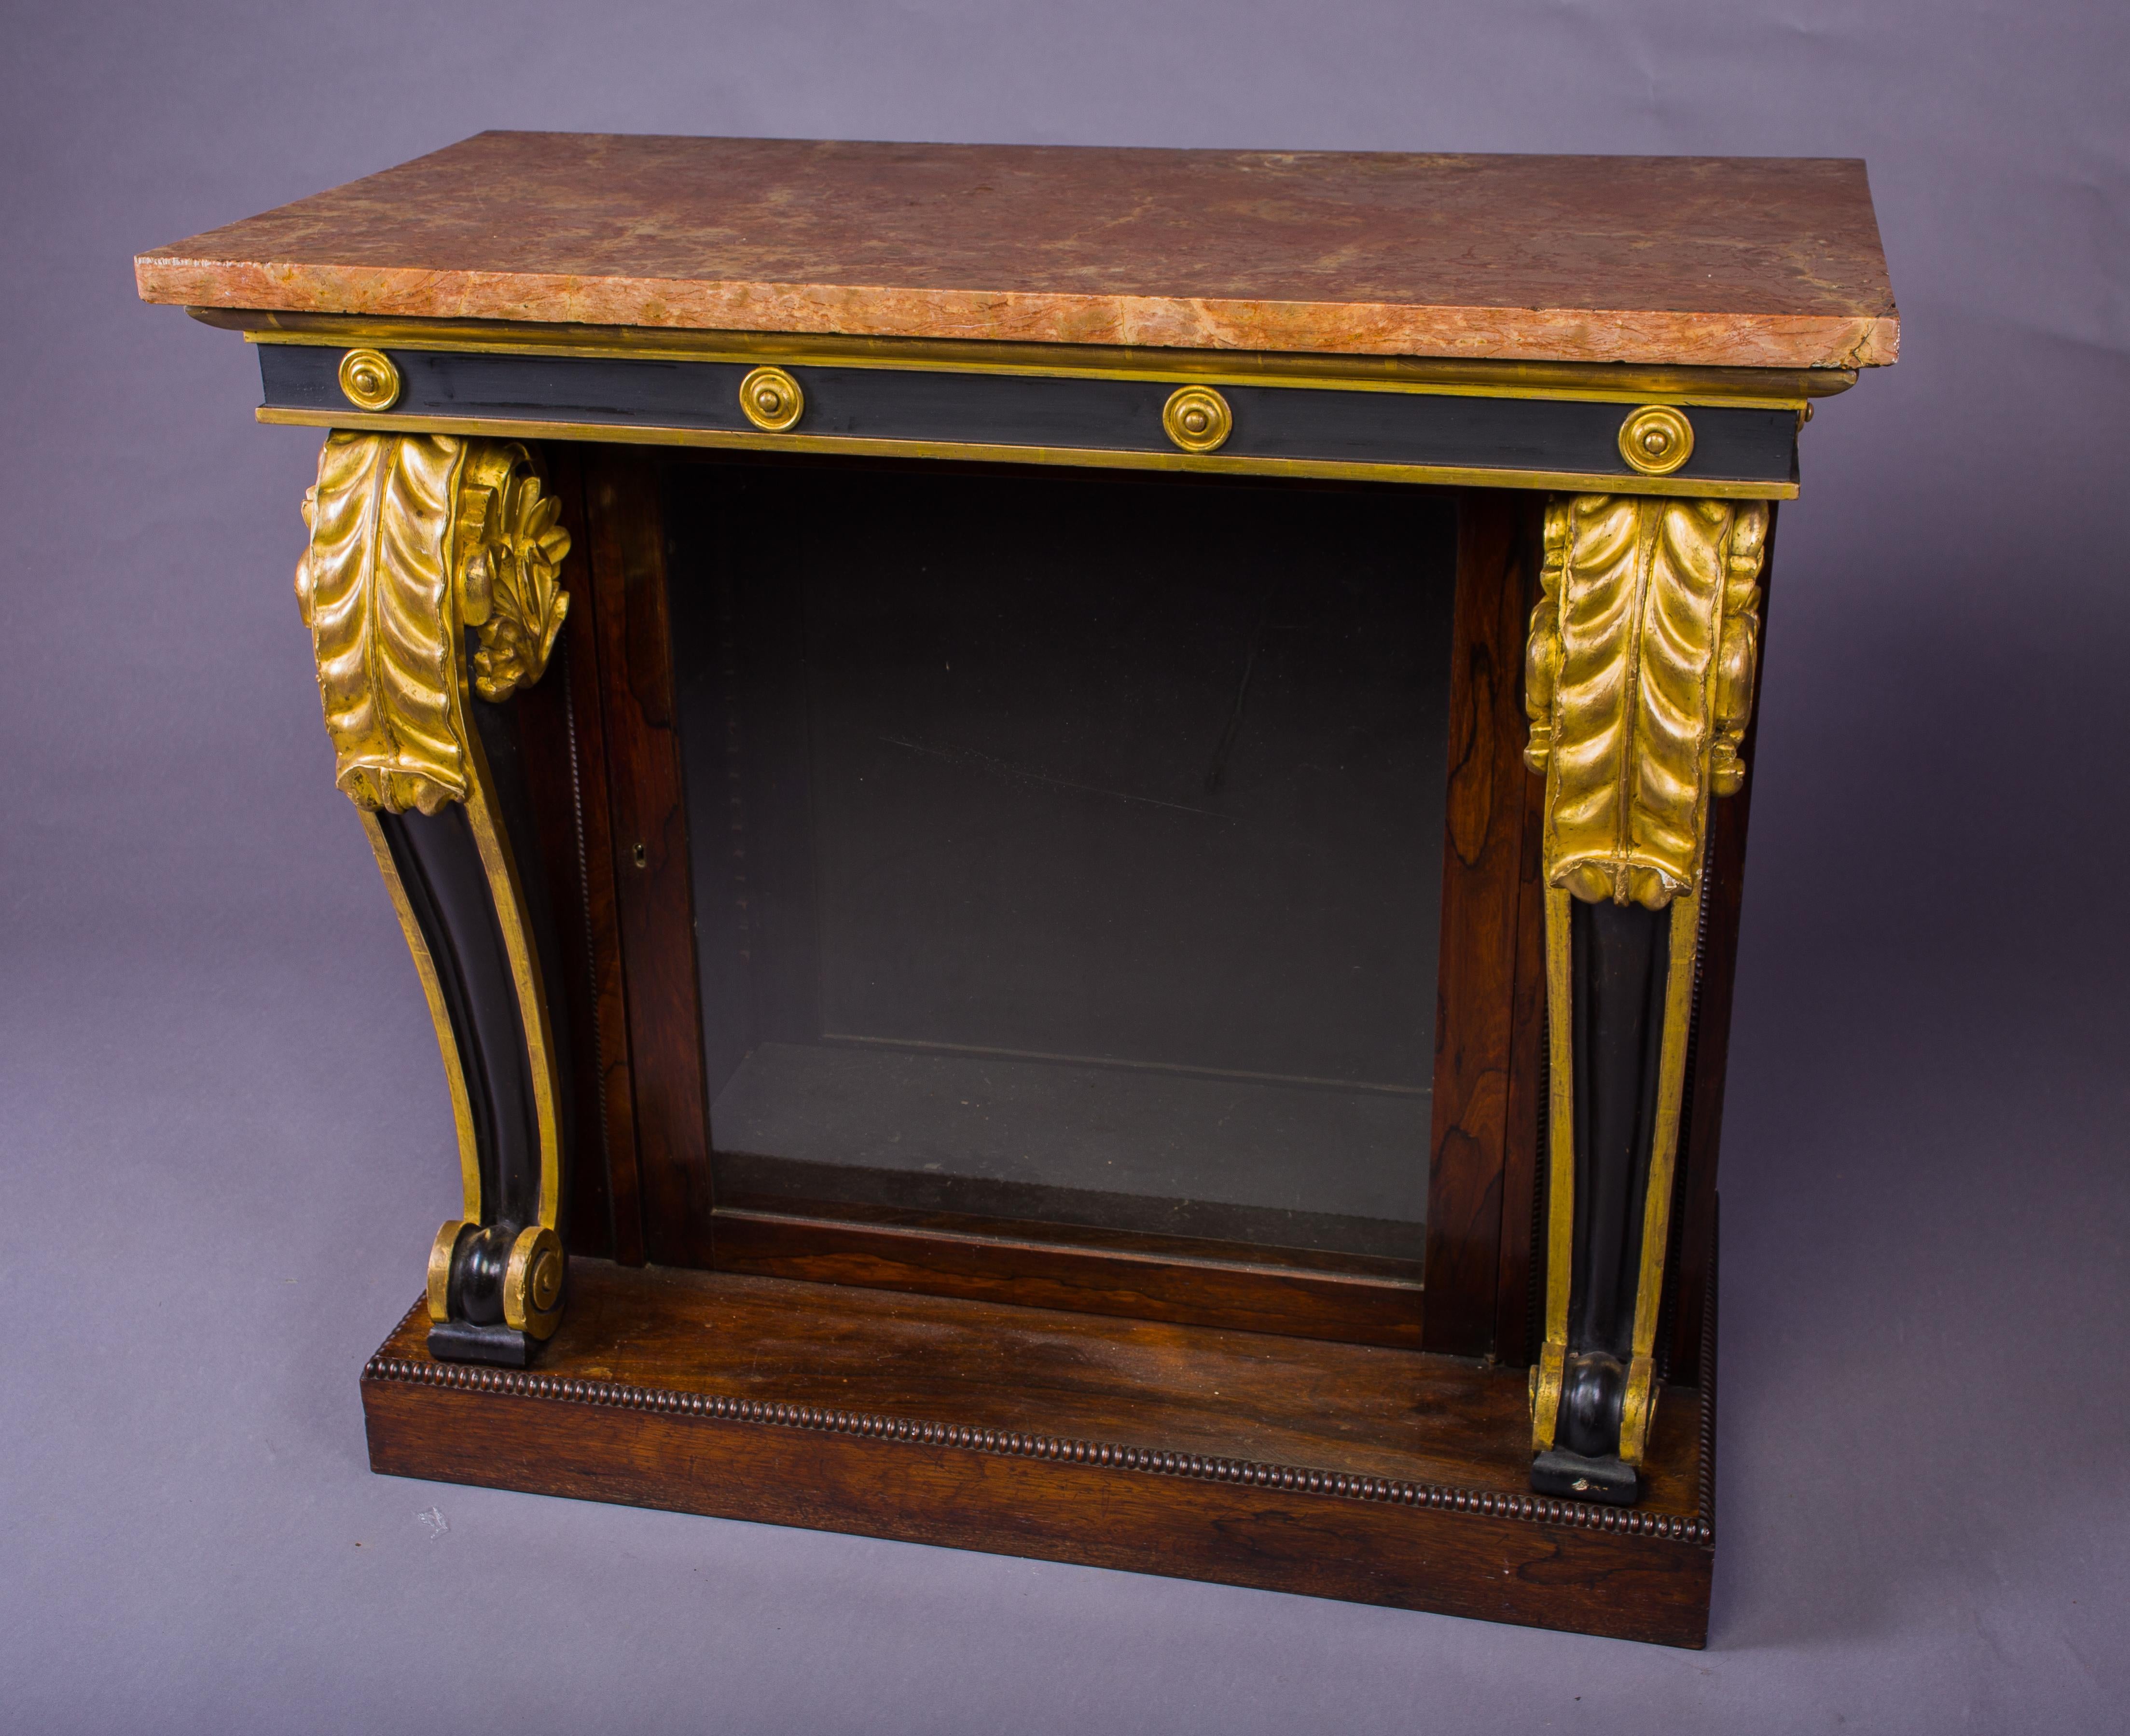 A Robust Regency Rosewood, Gilt-wood and Ebonized Console Cabinet
The original Marseilles pink rectangular marble top, above a gilt-wood moulded and ebonized frieze mounted with roundels, flanked by bold Icanthus carved gilt-wood legs, with a single